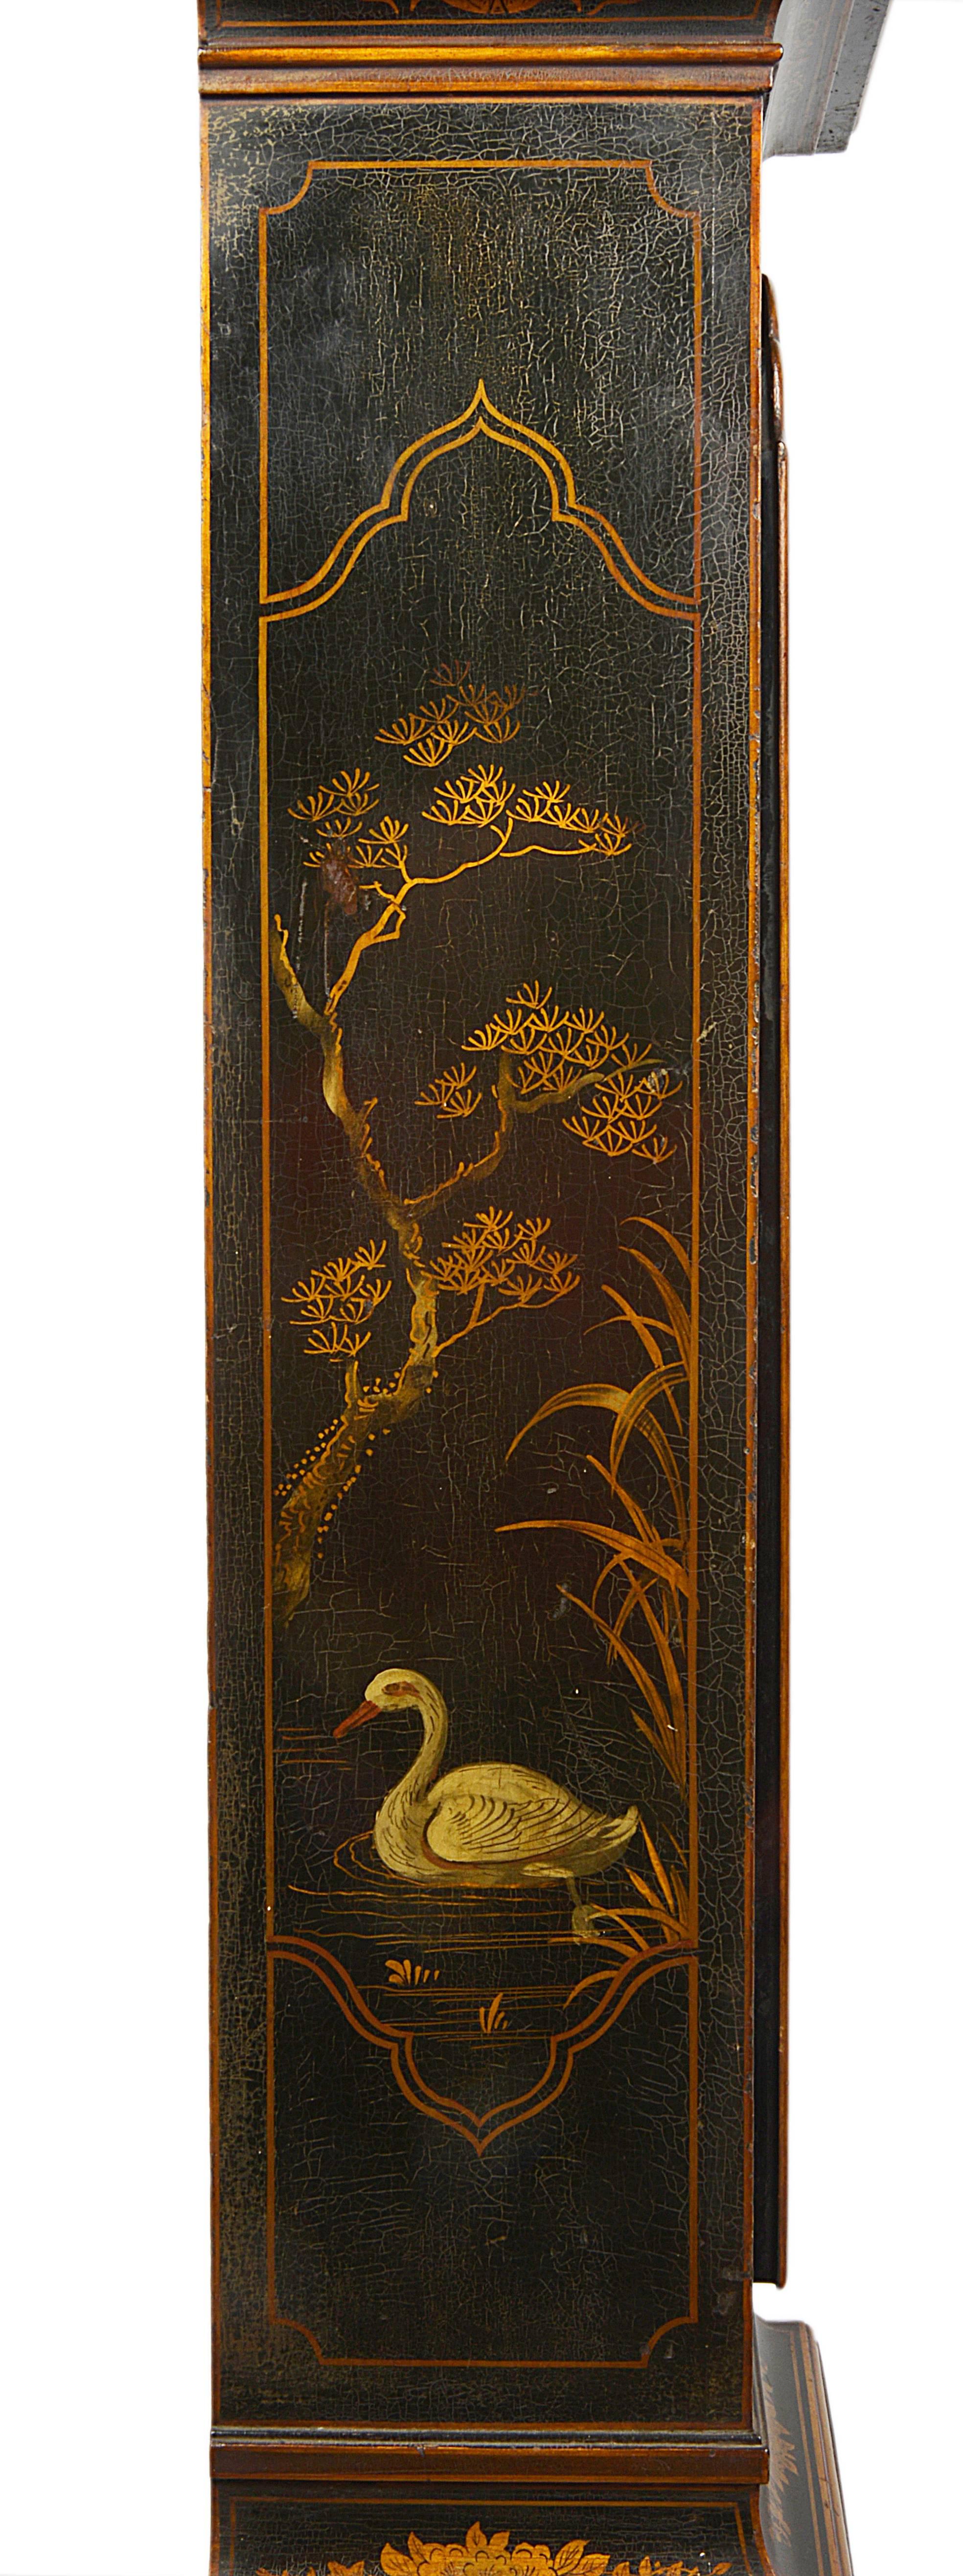 English Chinoiserie Lacquer Chippendale style Grandmother Clock